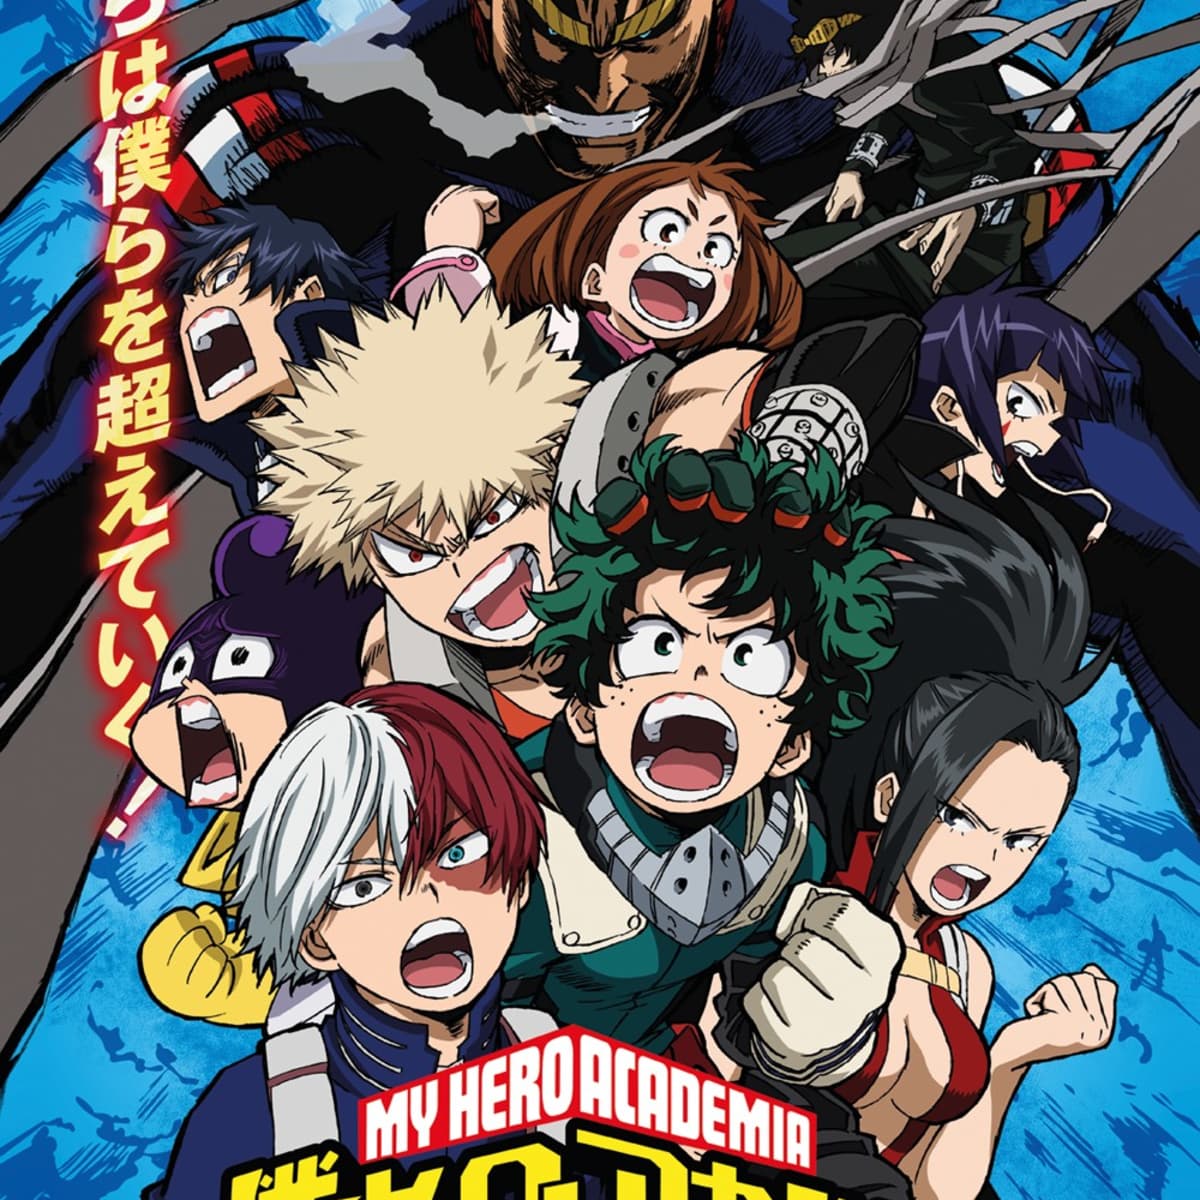 The American appeal of anime show 'My Hero Academia' - Student Life